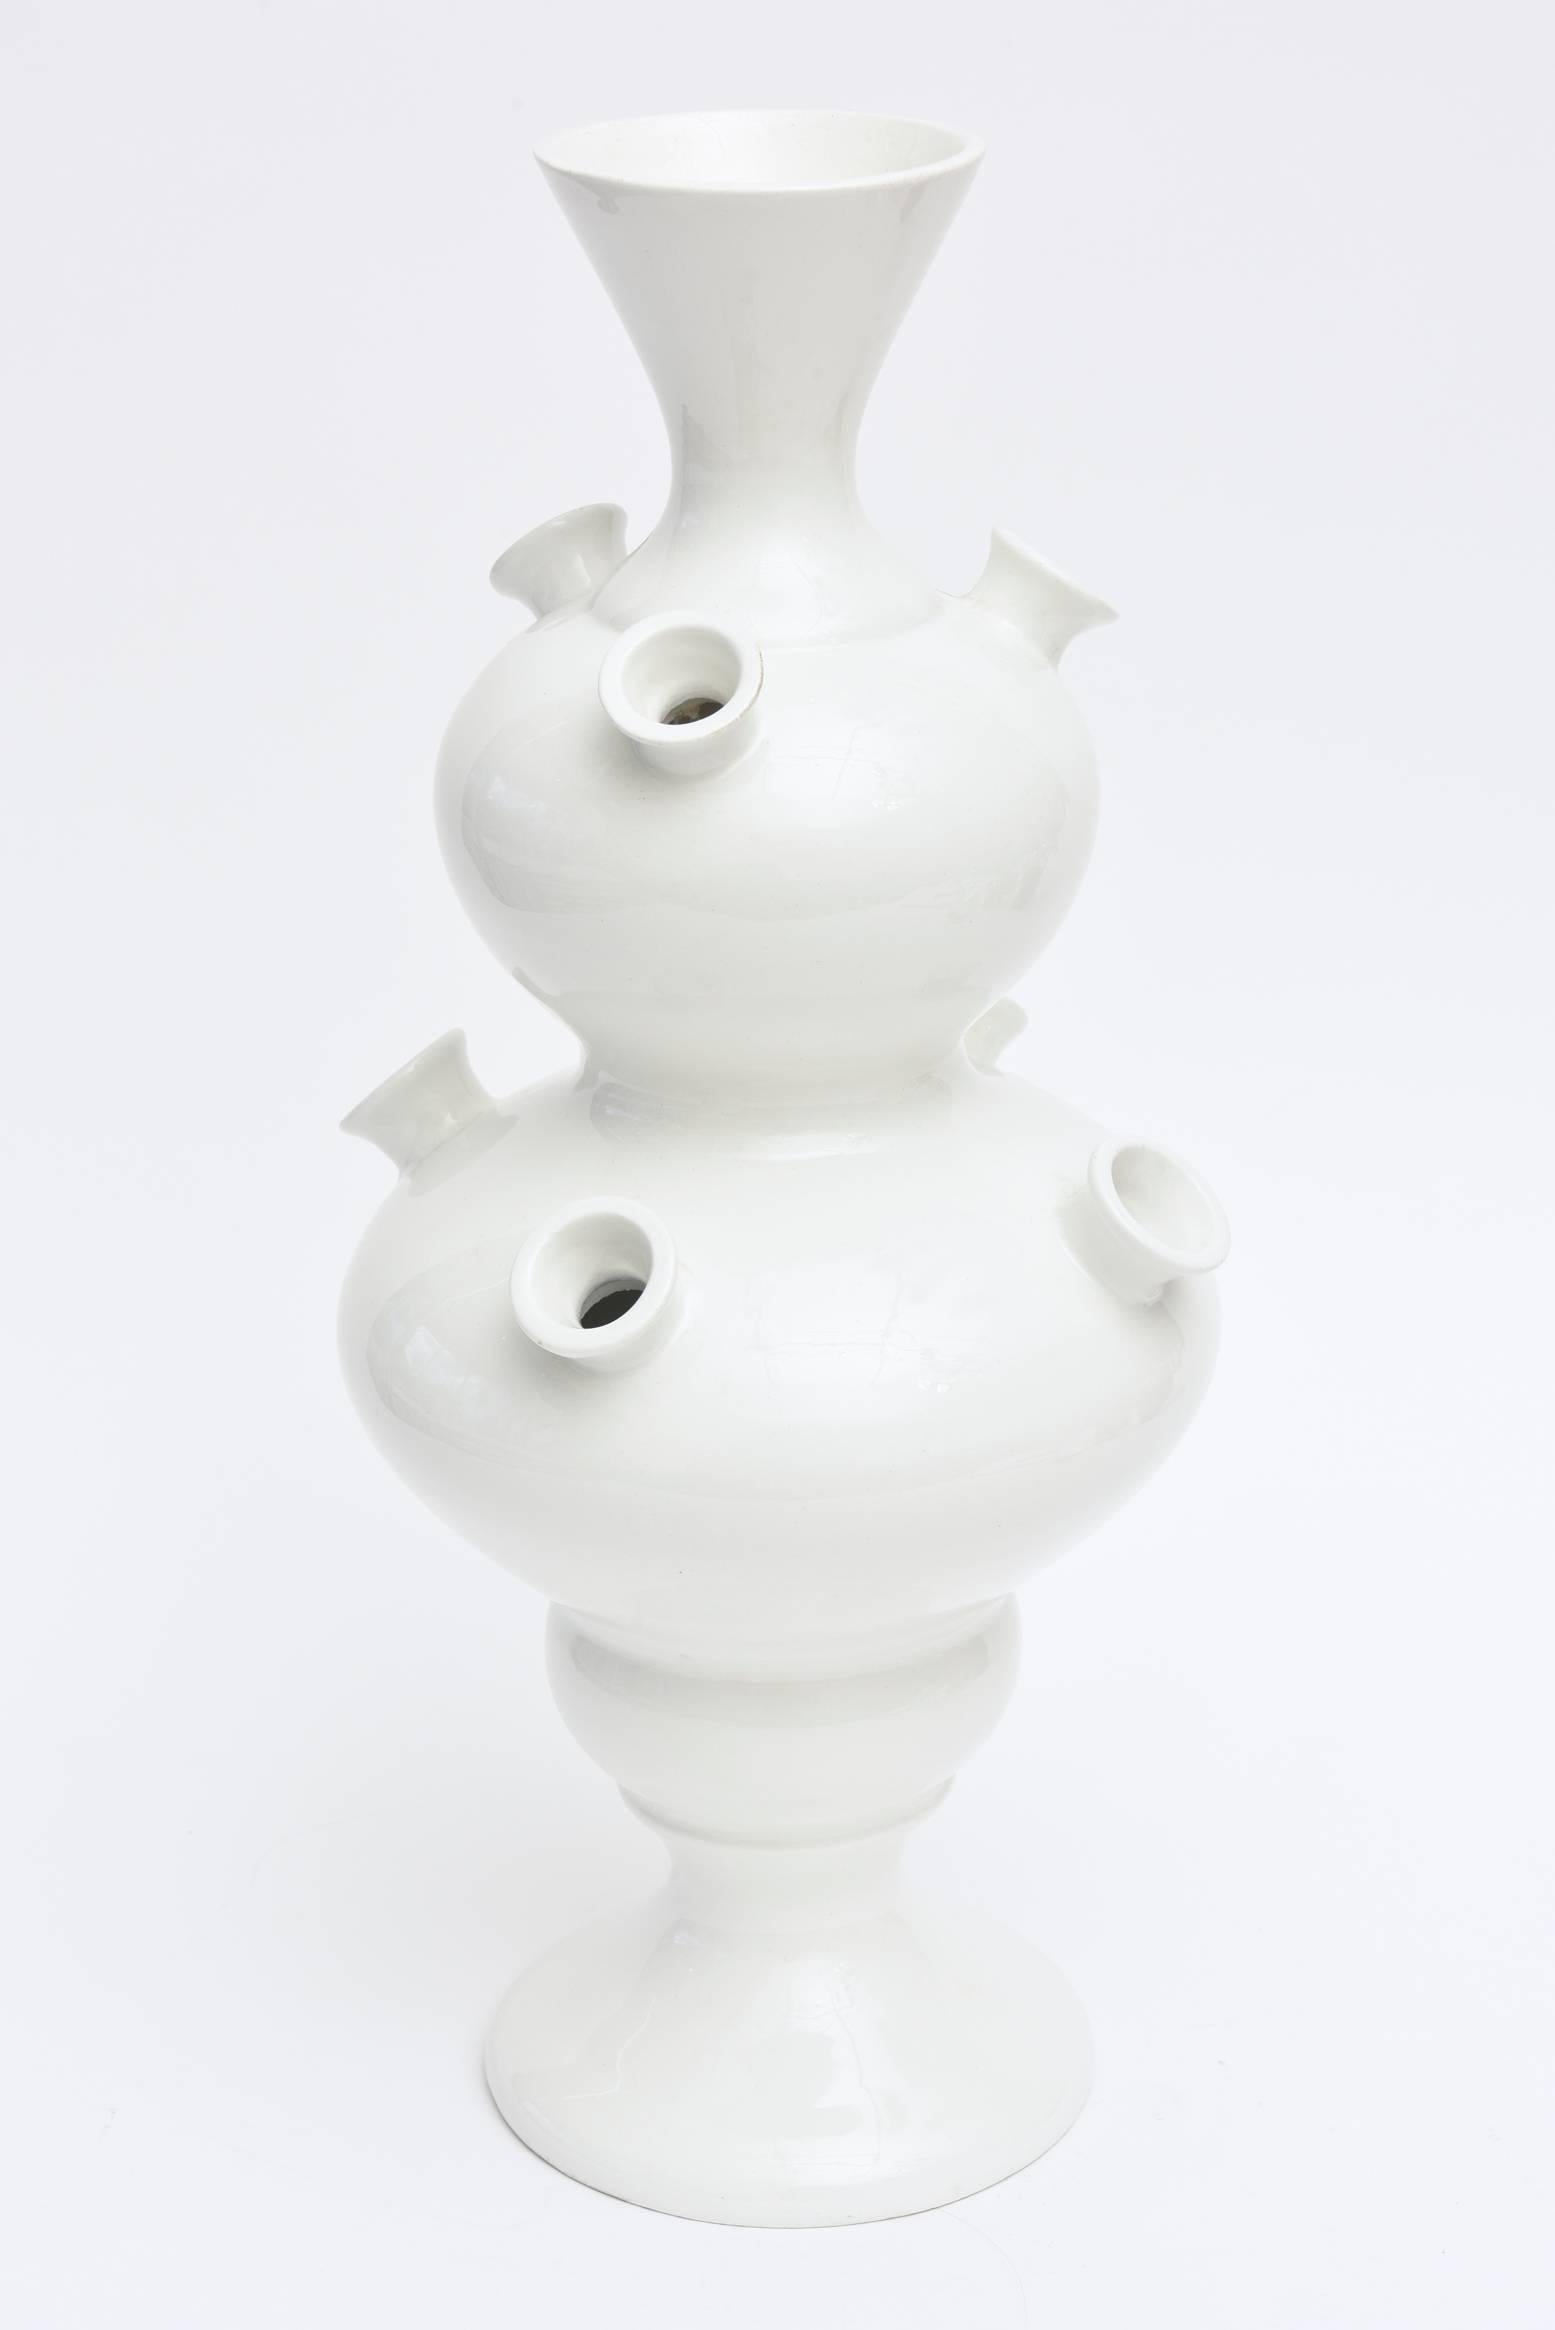 This wonderful and organic modern white Italian ceramic is fantastic. It is from the 80's and looks so modern today. It has a sensuality to it in the shape and form. The  protruding open air appendages add dimension.
it is a great ceramic object,